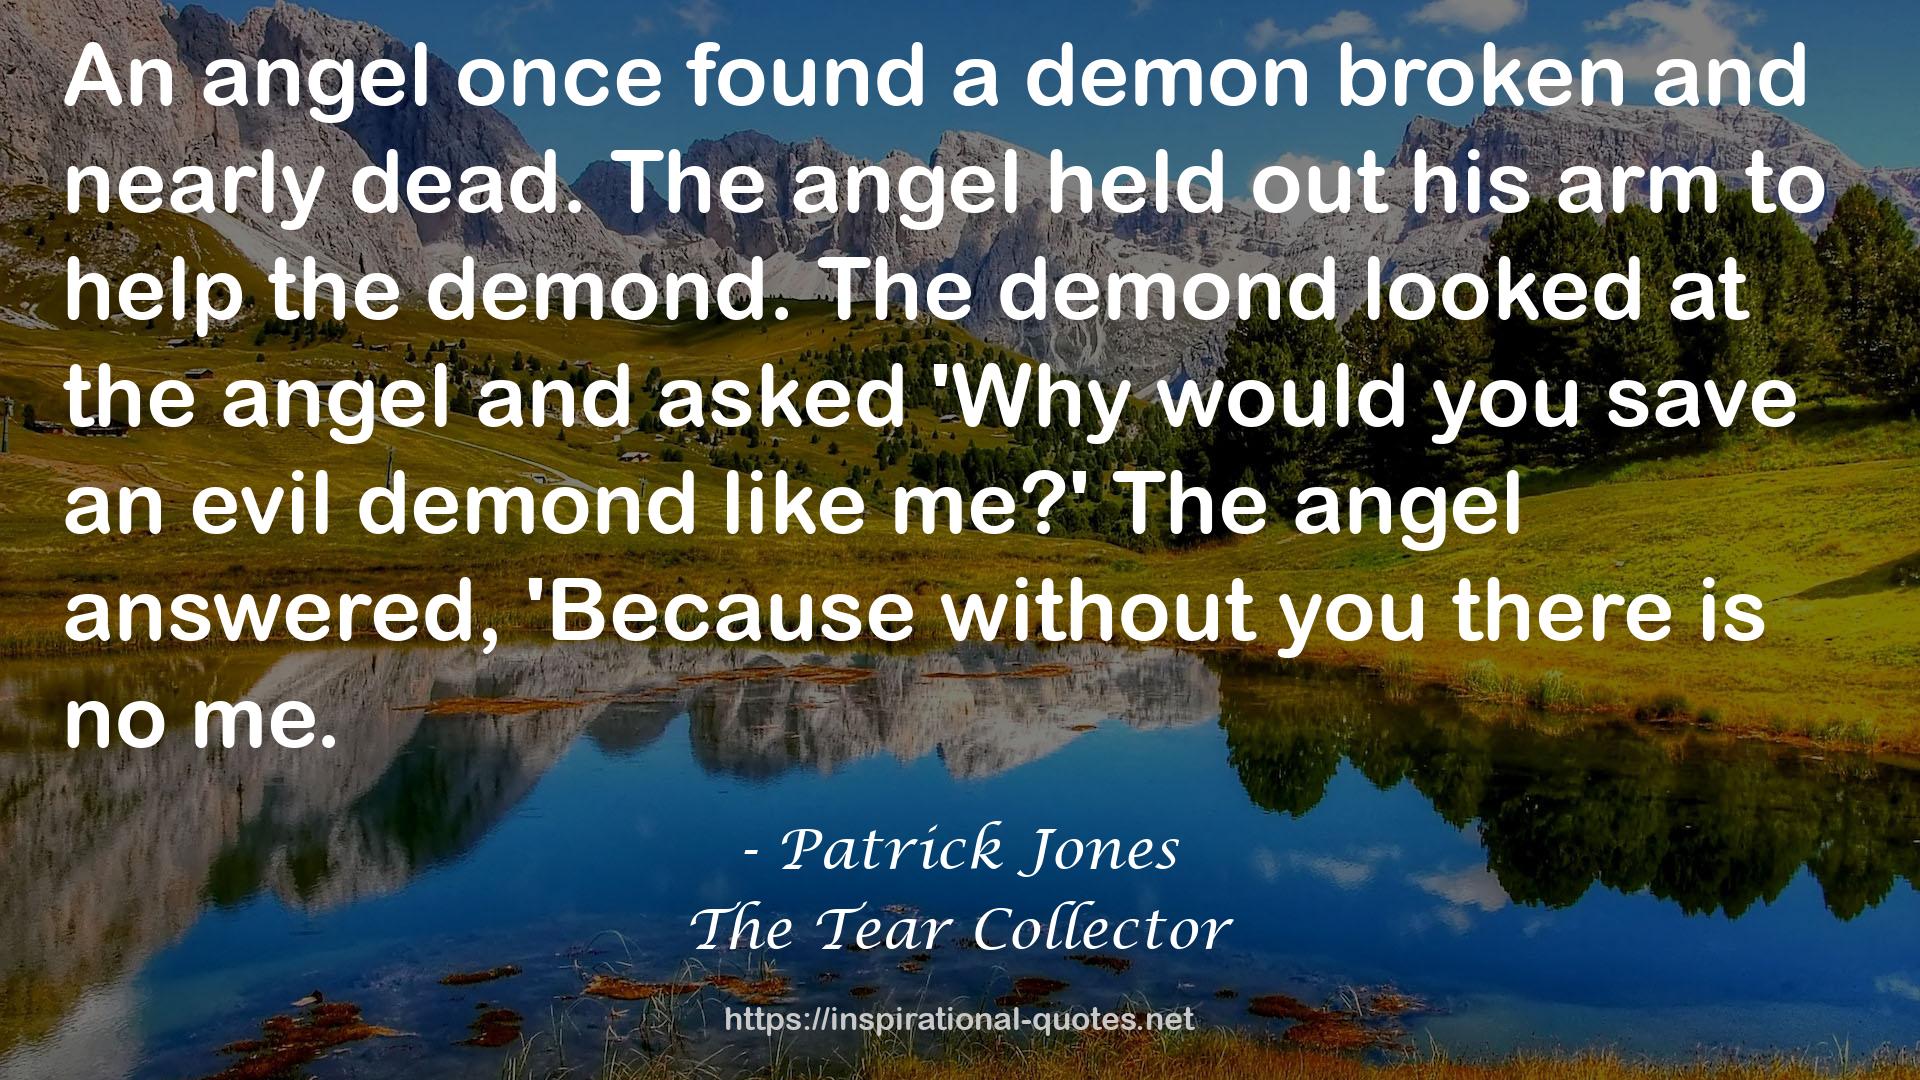 The Tear Collector QUOTES